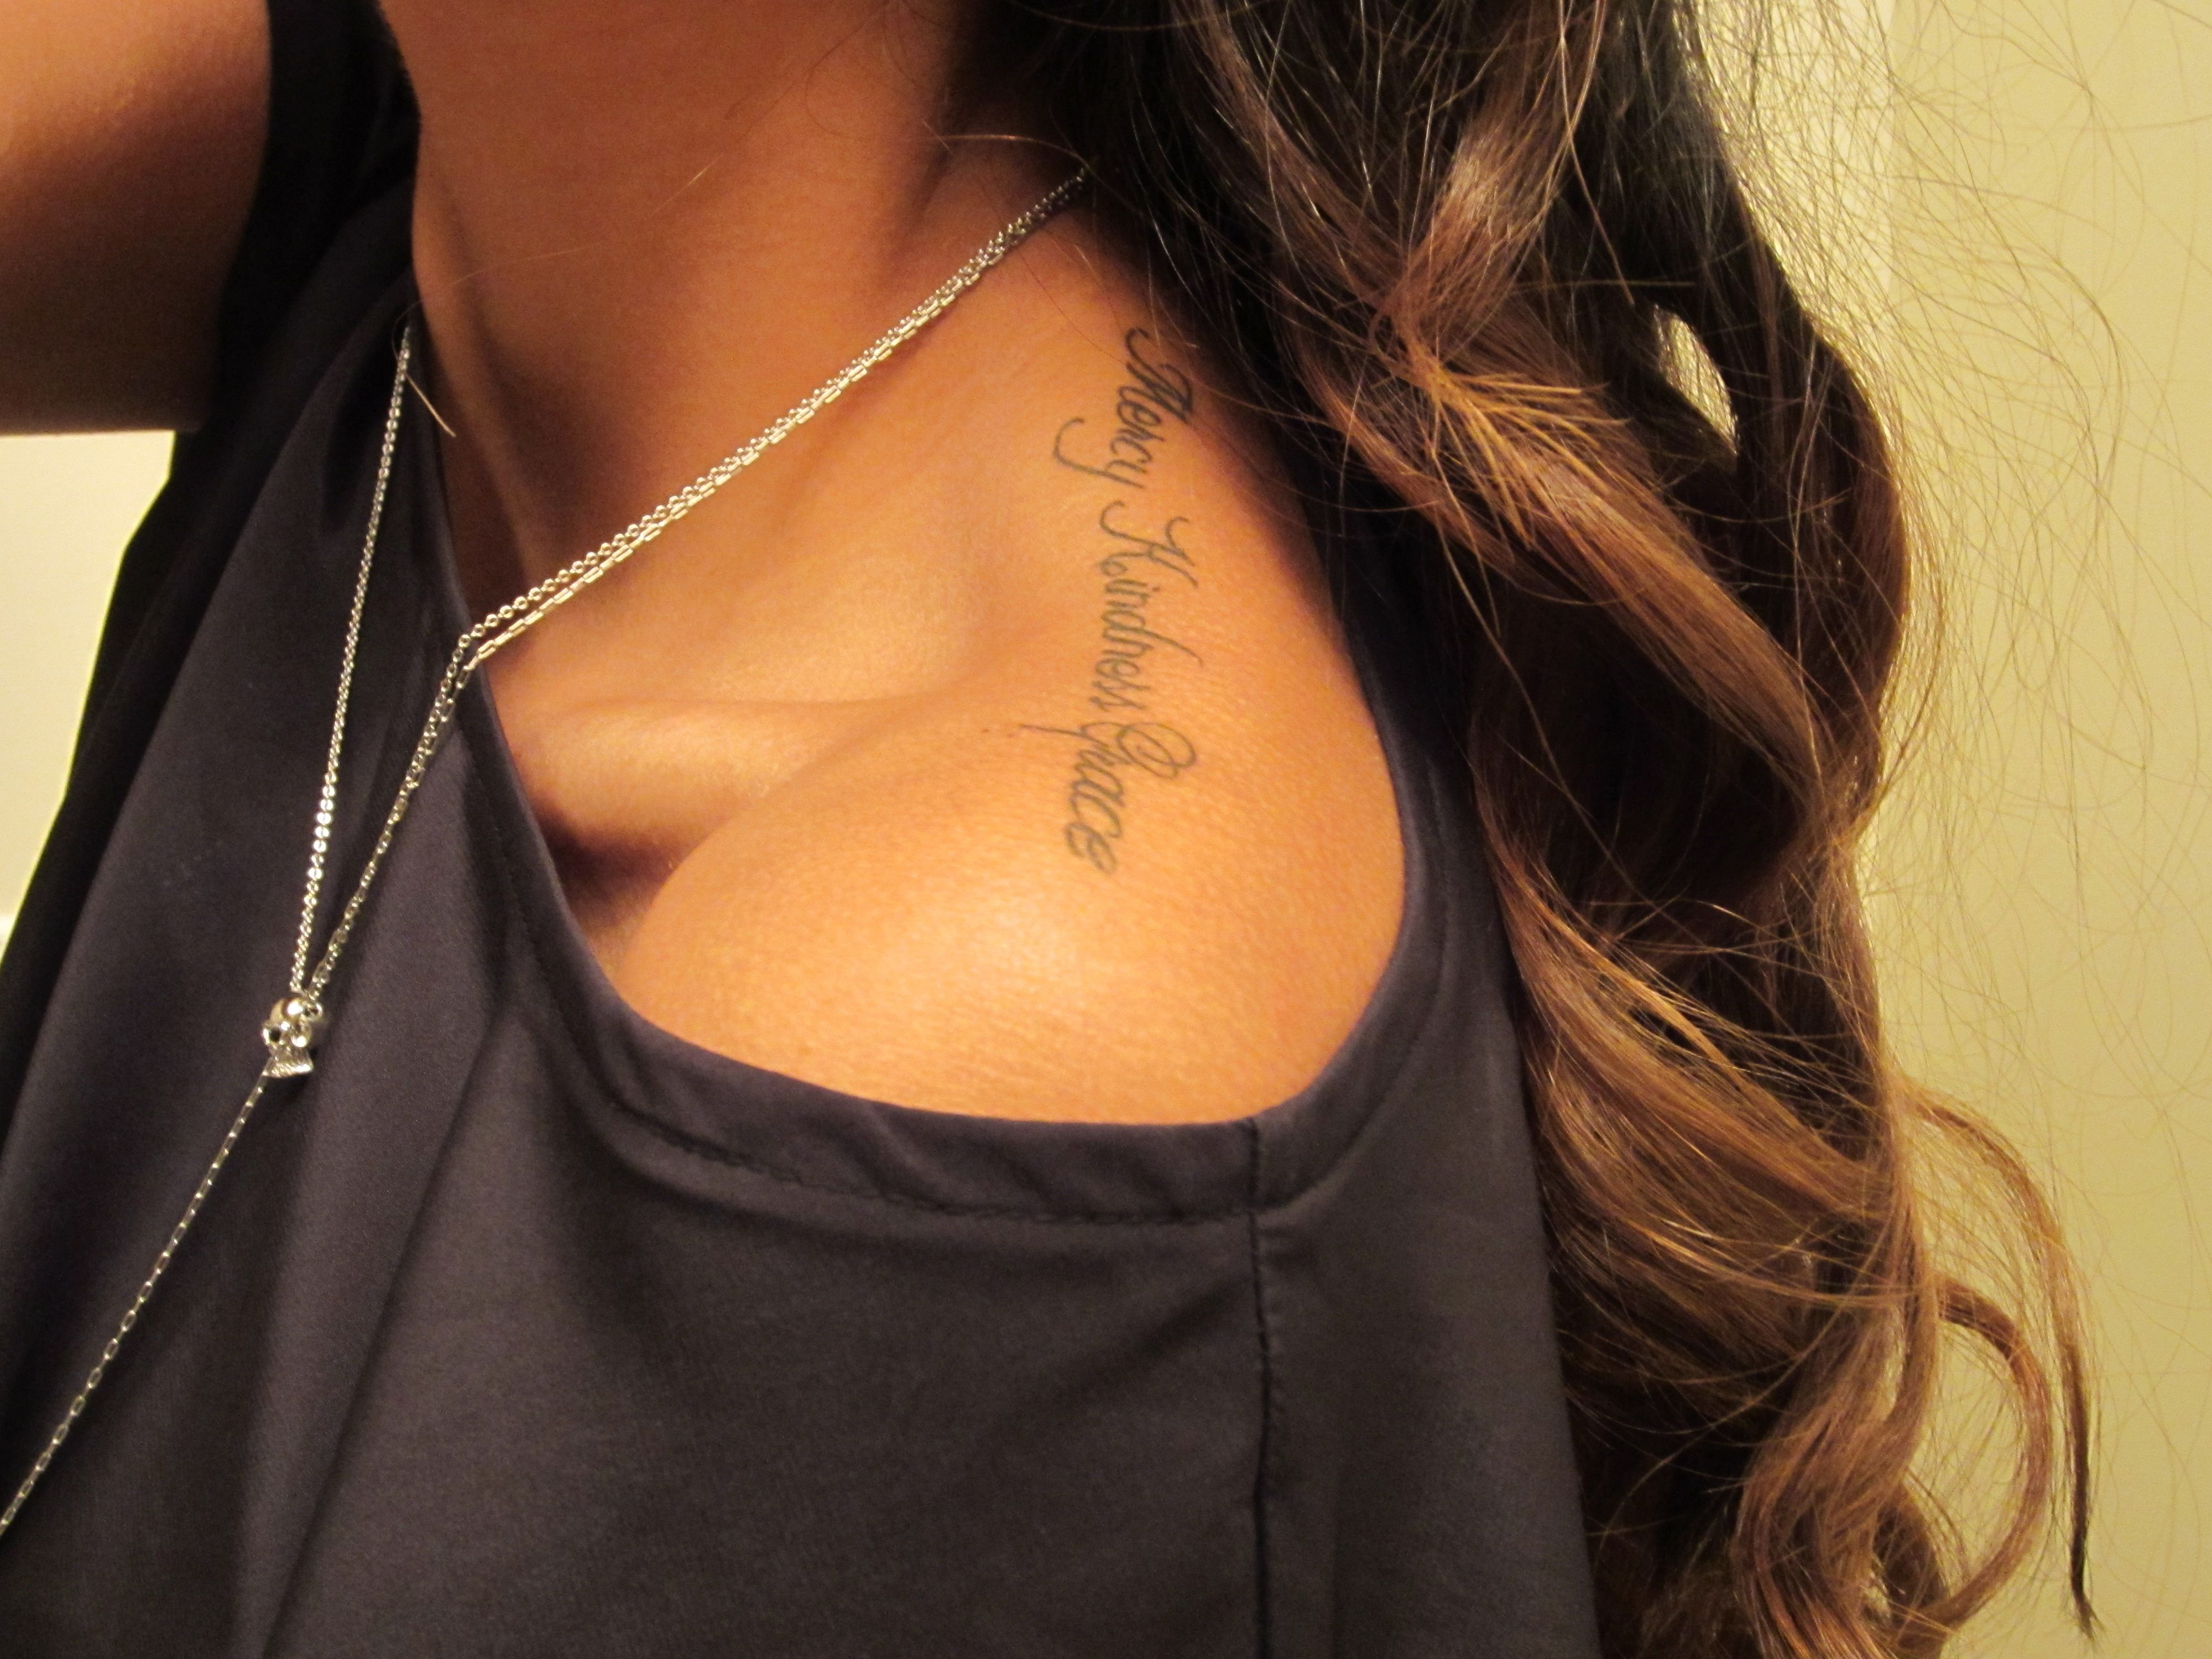 Top Of The Shoulder Tattoo It Says Mercy Kindness Grace Like The intended for dimensions 4000 X 3000